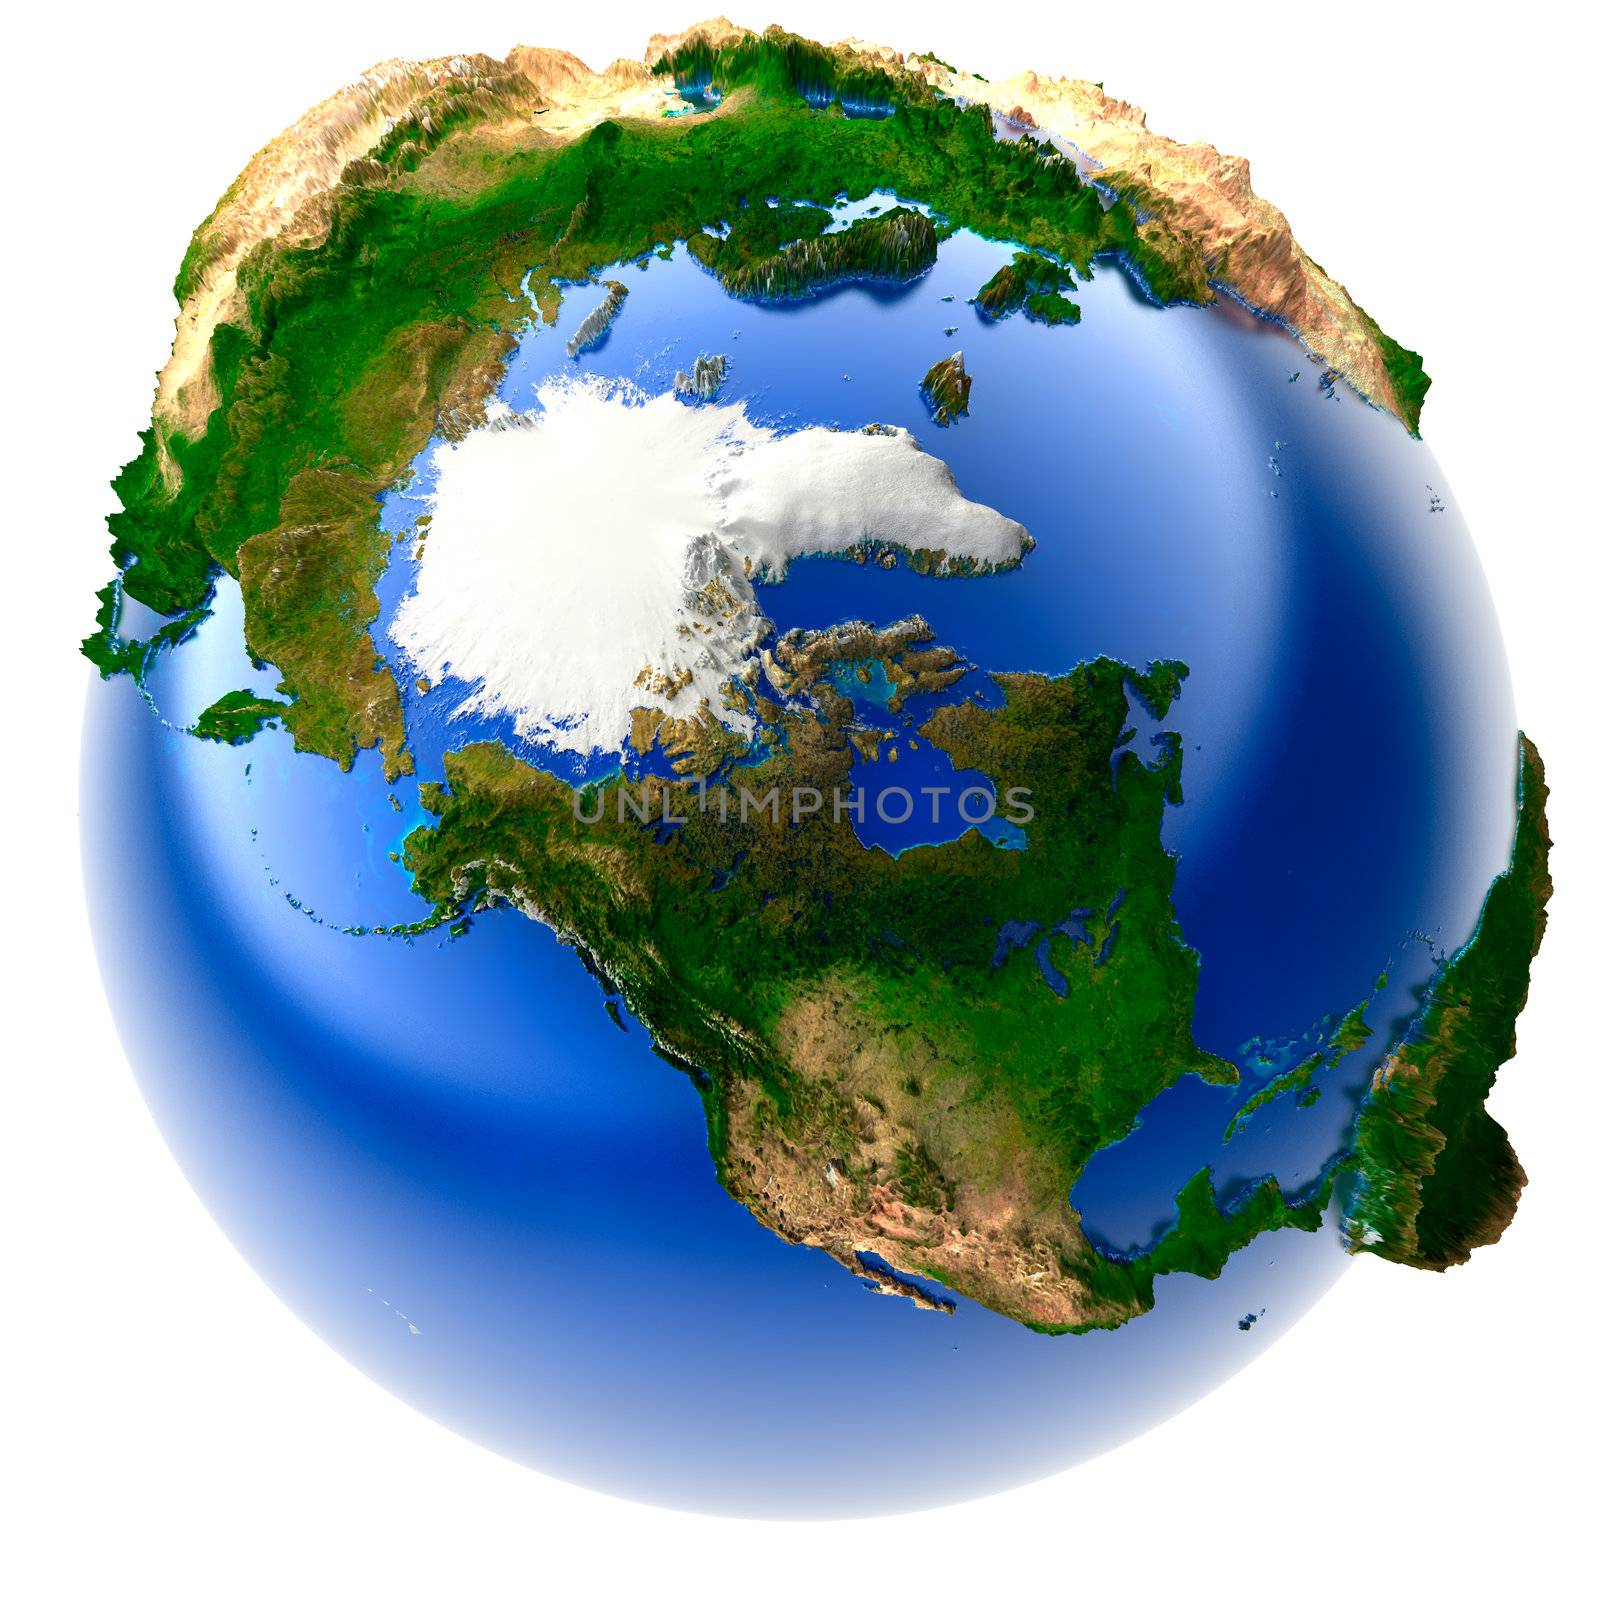 3D model of the globe with an exaggerated vertical relief